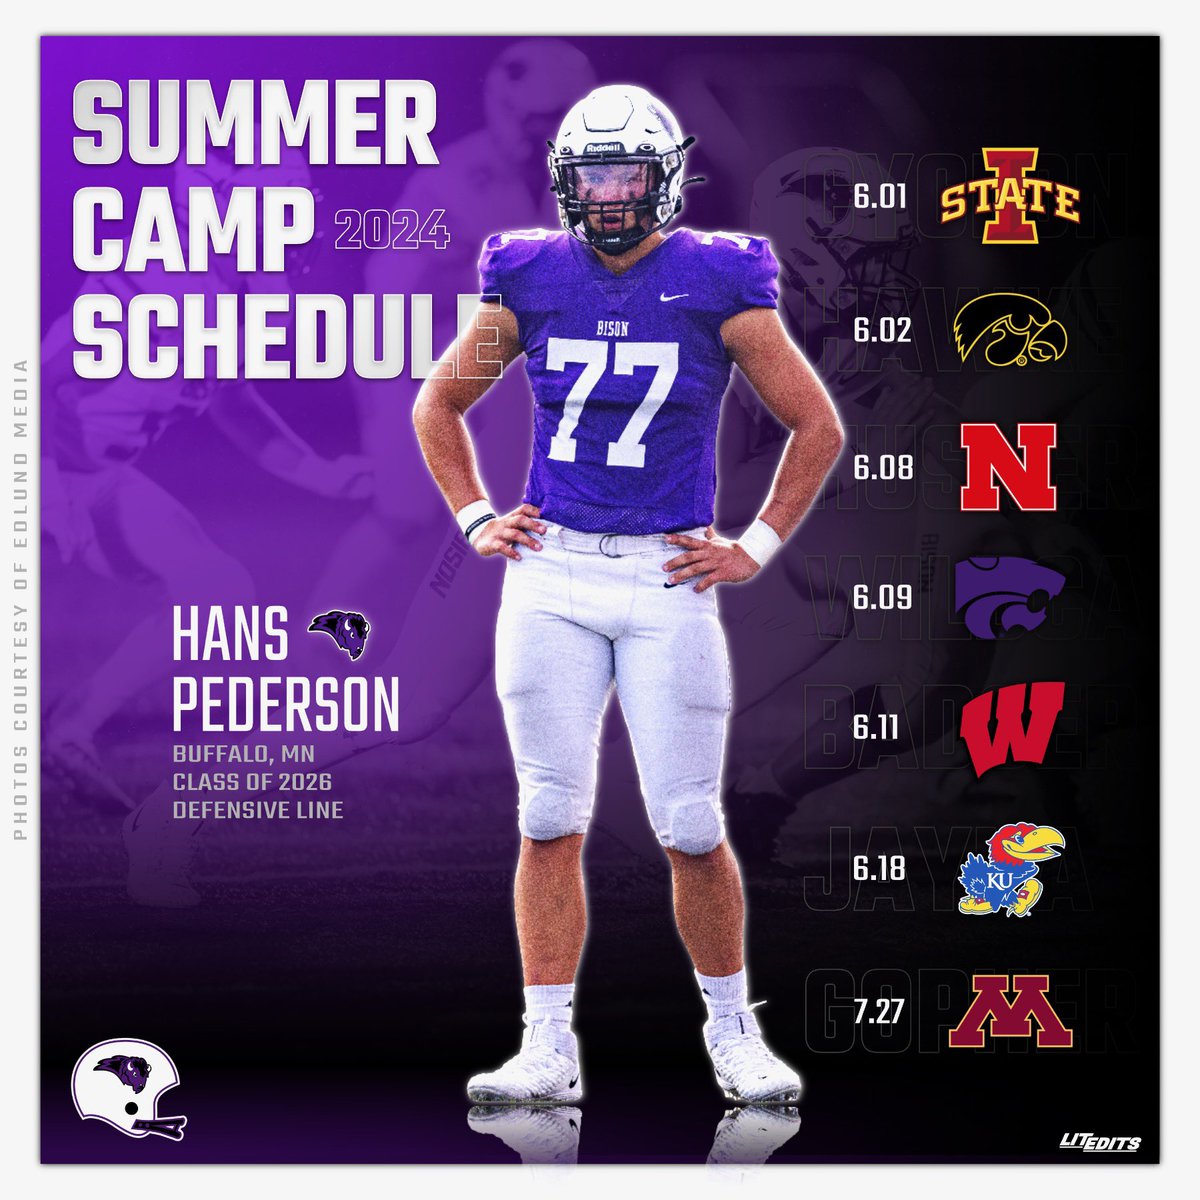 Here is my summer college camp schedule, Can’t wait to compete, learn new techniques and refine my skills. Thank you @LitEditsLLC for the graphic! @GoBisonFootball @J_Litterer714 @WardNickA